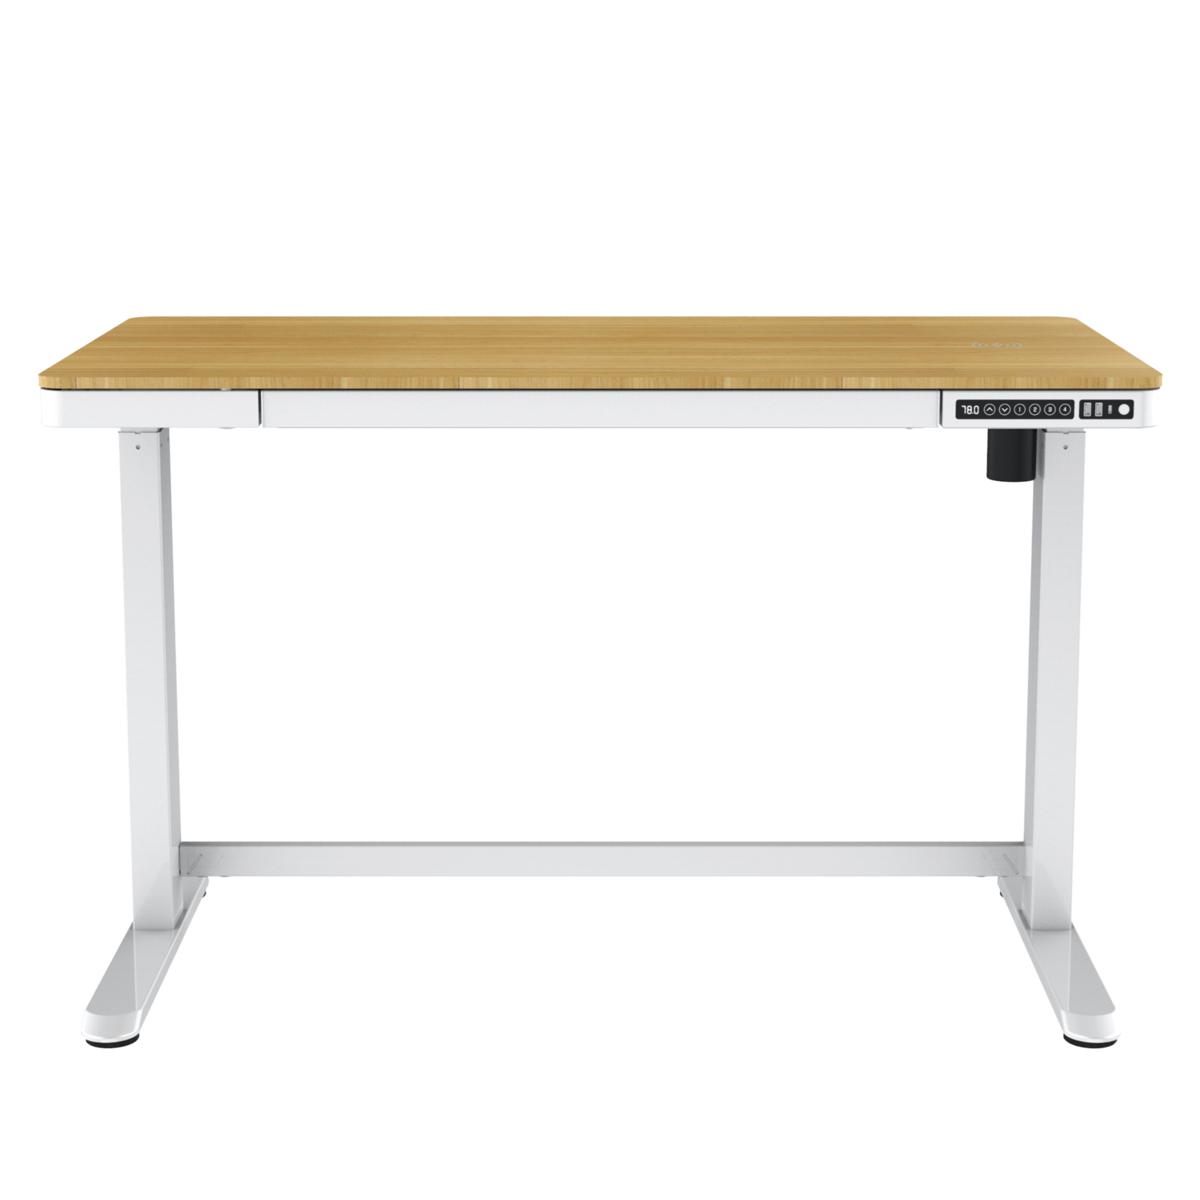 Koble Juno Electric Sit-Stand Desk